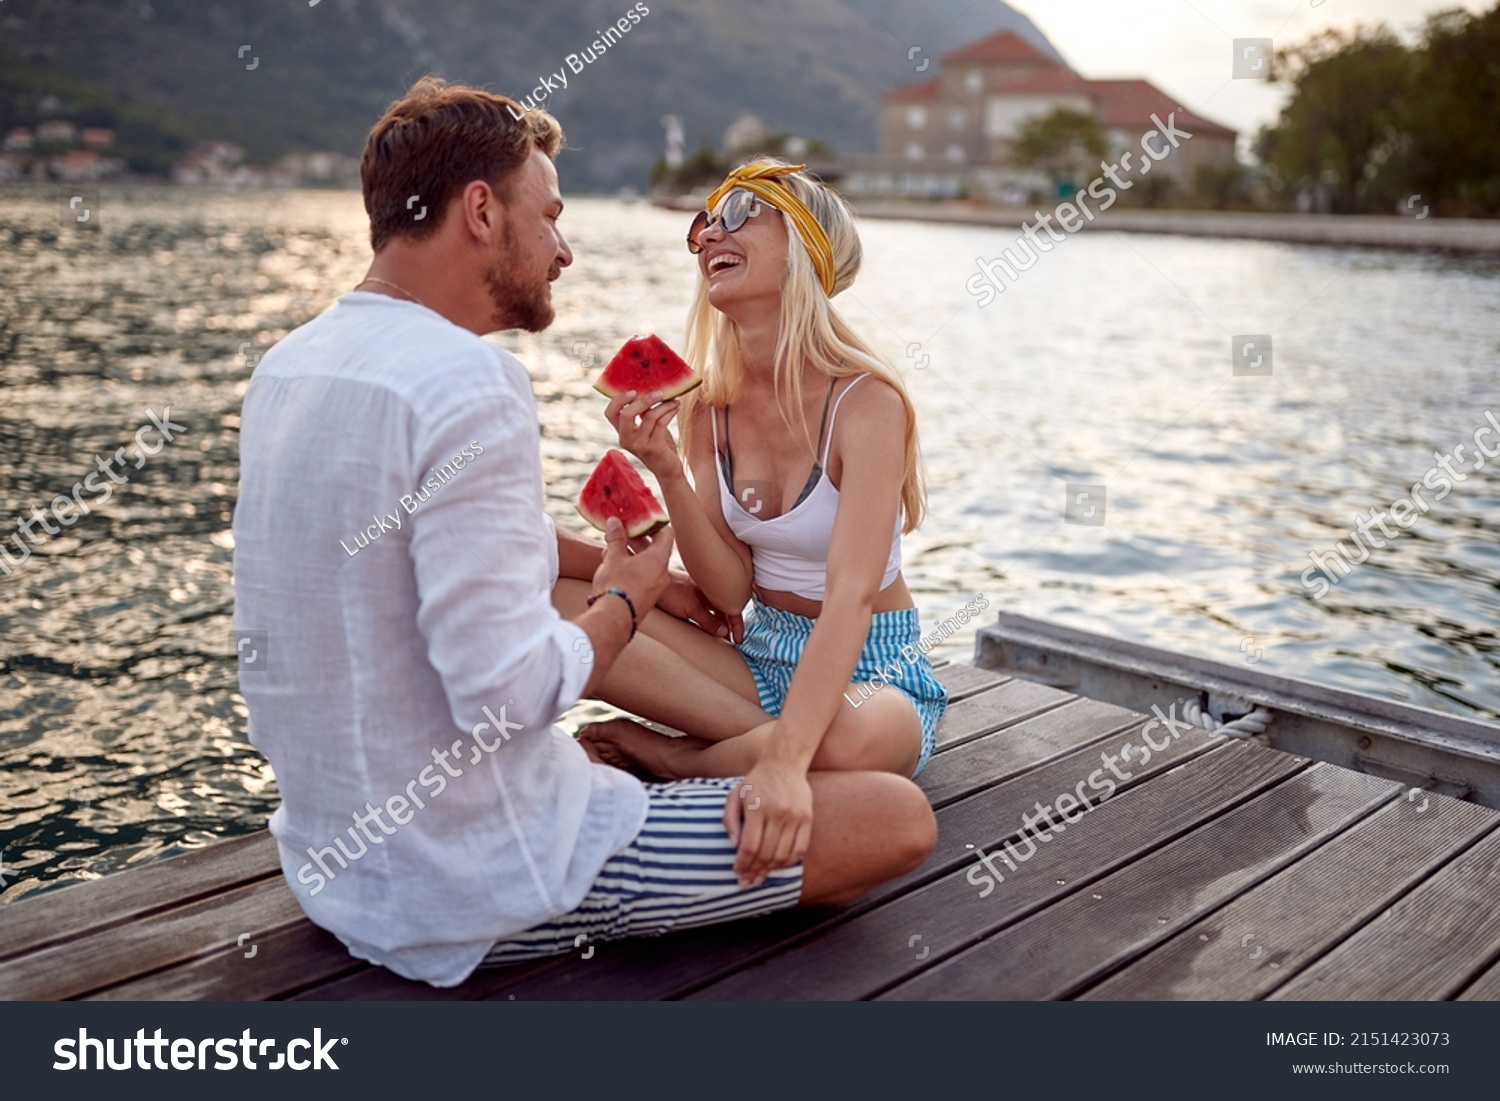 Couple having good time on date by sea siting on wooden dock, laughing and eating watermelon. Love, fun, togetherness concept. #2151423073